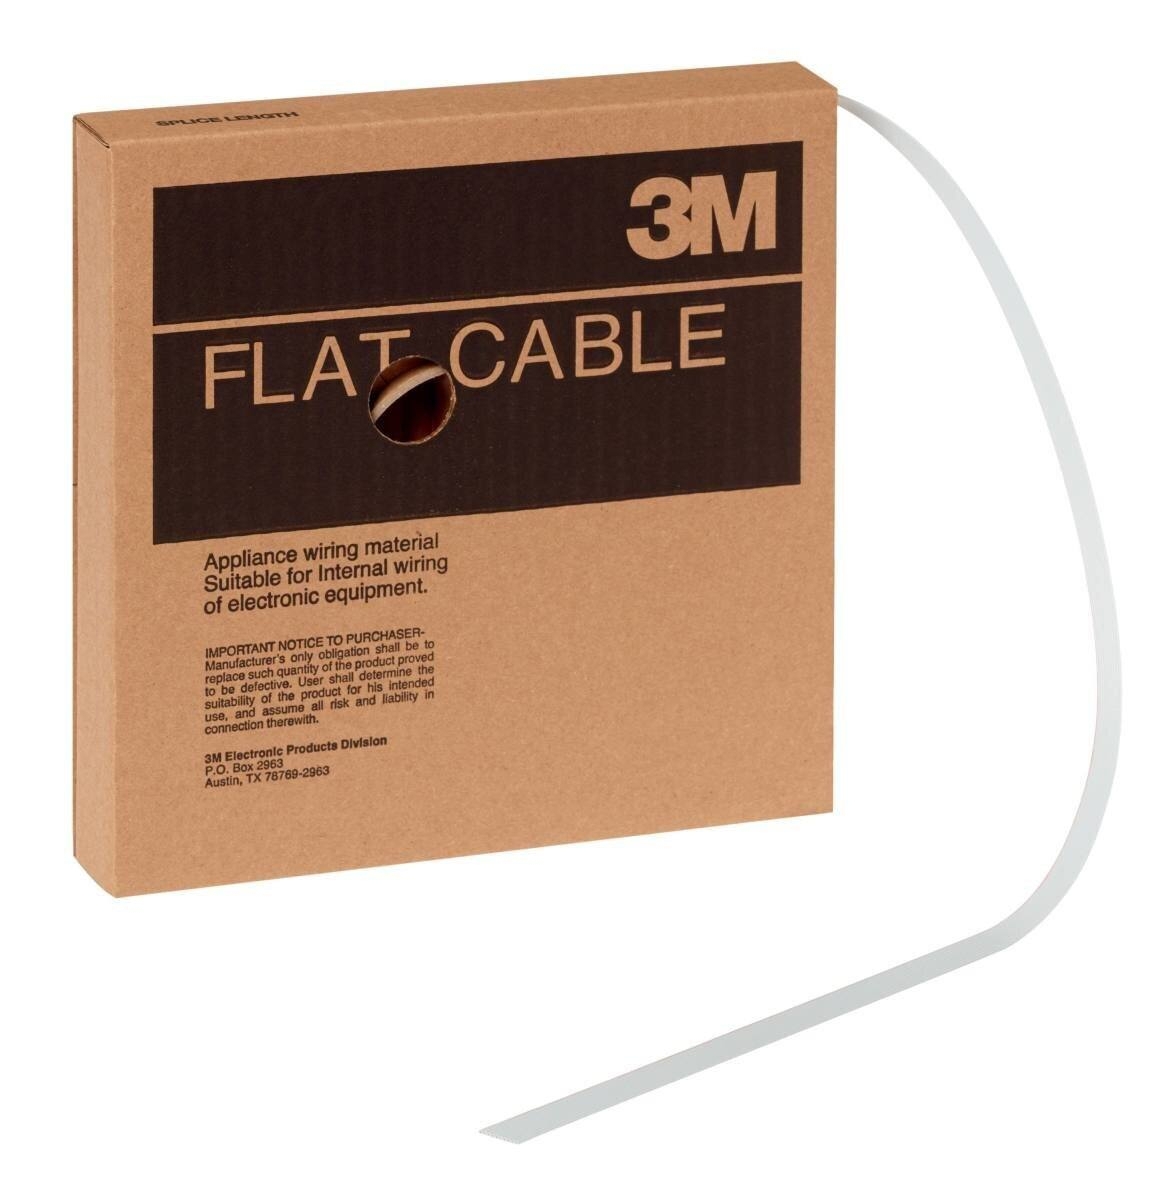 Cable plano 3M 3801/40, 40 polos, serie 3801, conductor trenzado, 1,27 mm, gris, 30,5 m